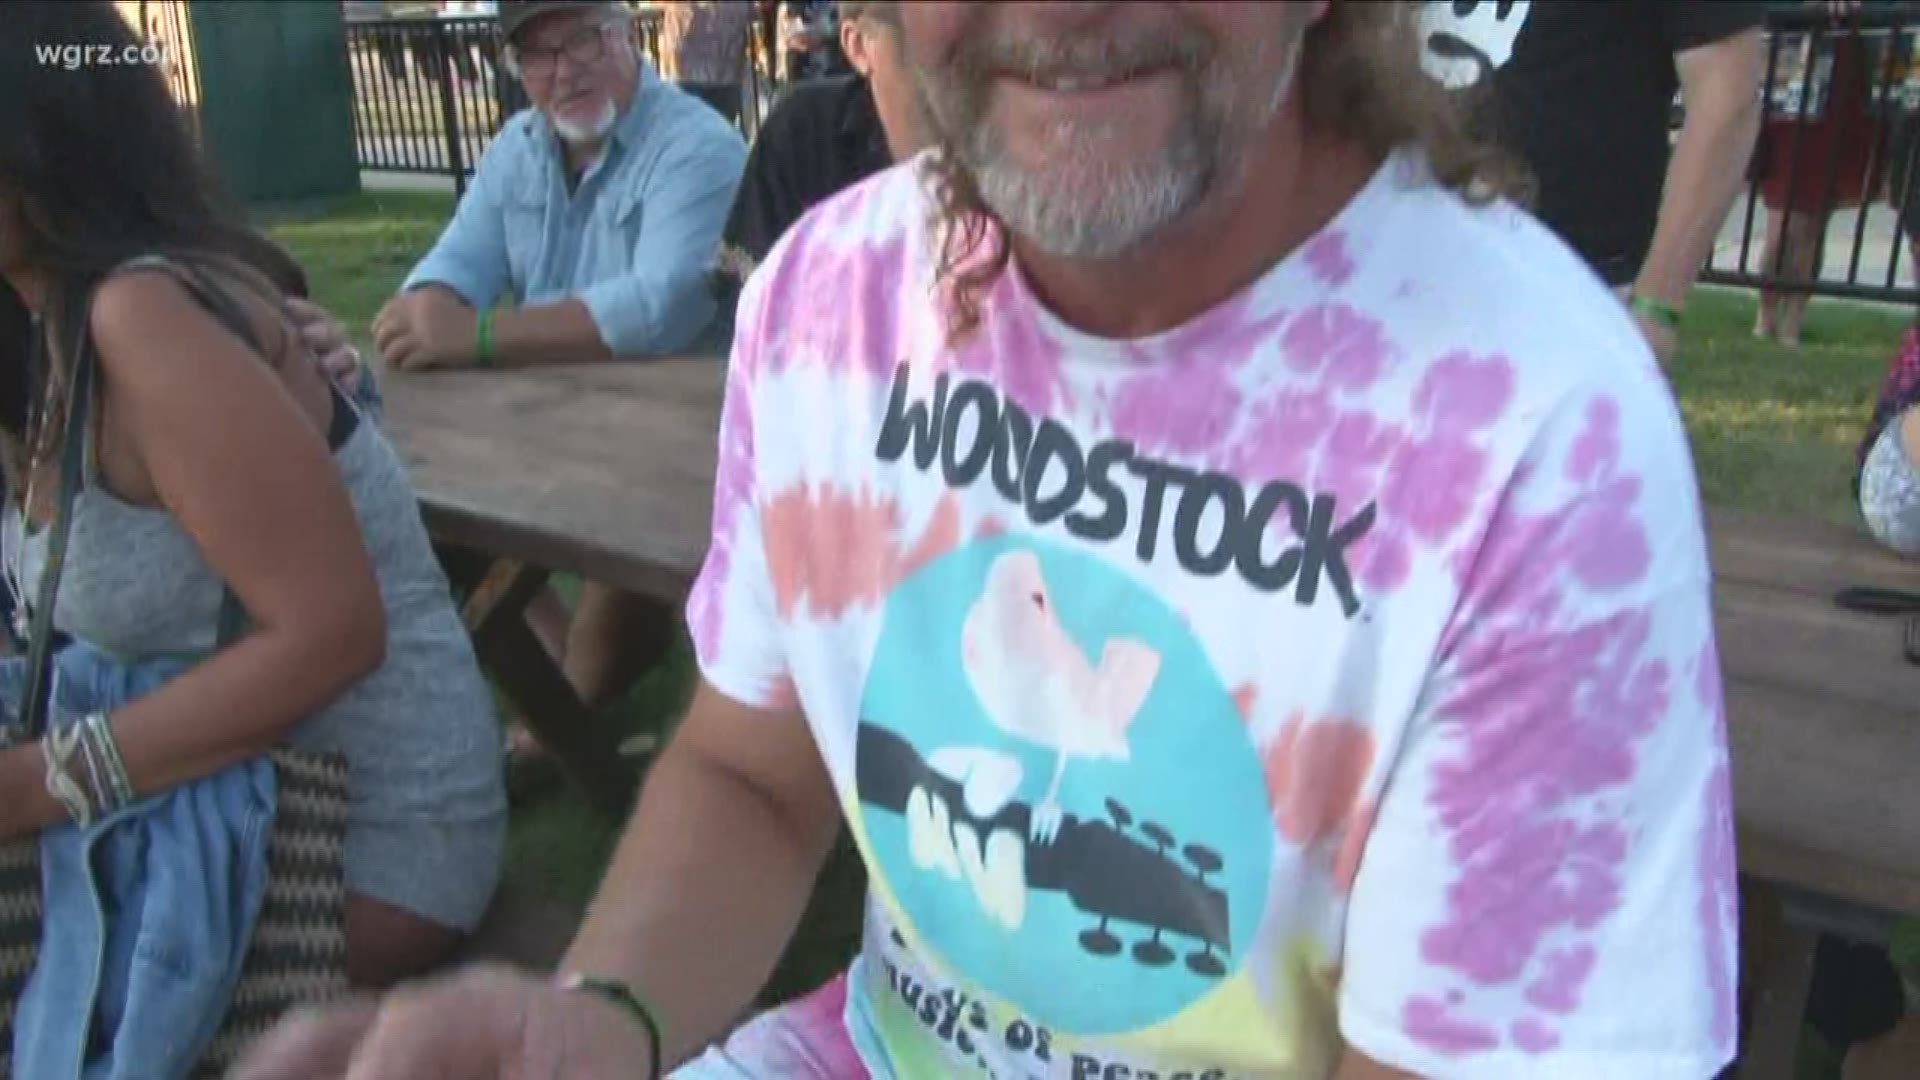 The city of Buffalo celebrated an evening of music on the Waterfront to remember the 50th Anniversary of Woodstock.